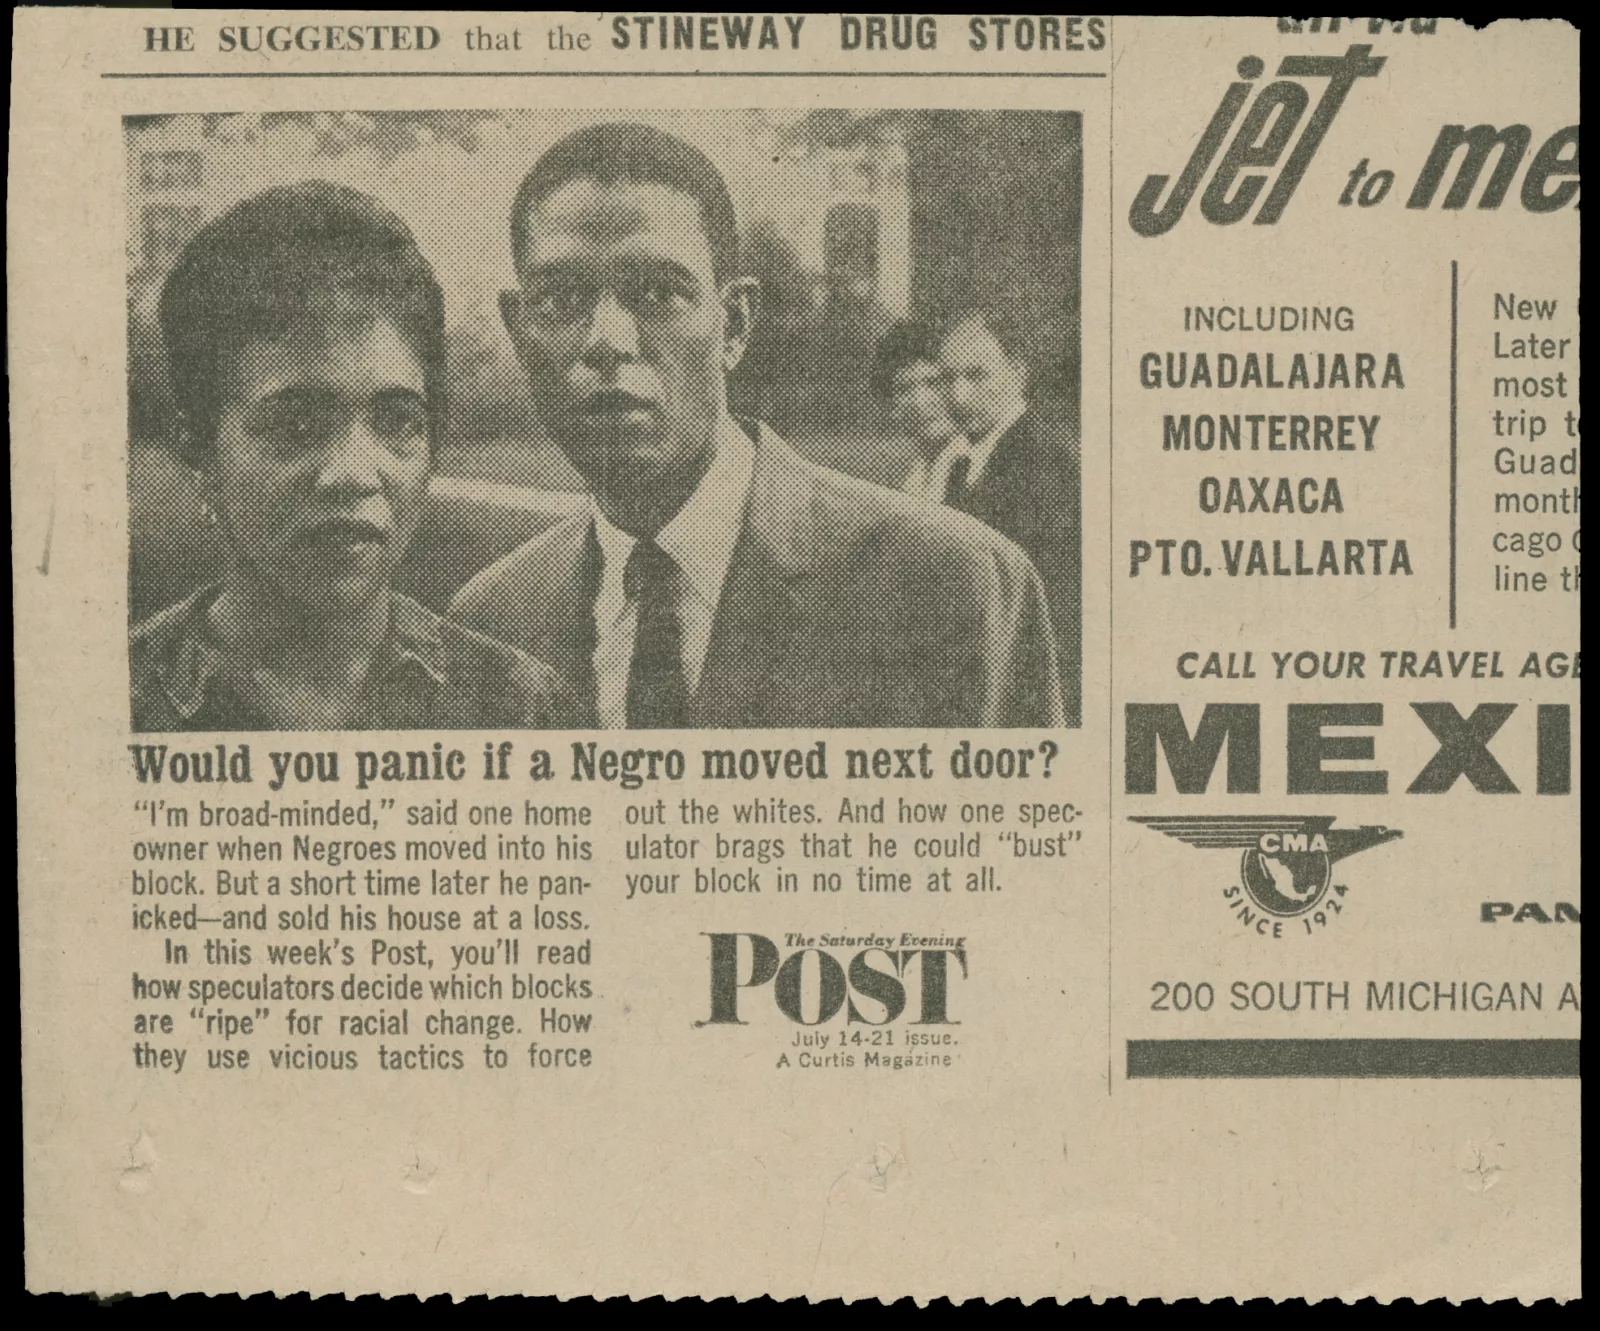 A newspaper clipping features a photograph of an African American couple (a man and a woman). Underneath the photo is the headline “Would you panic if a Negro moved next door?”